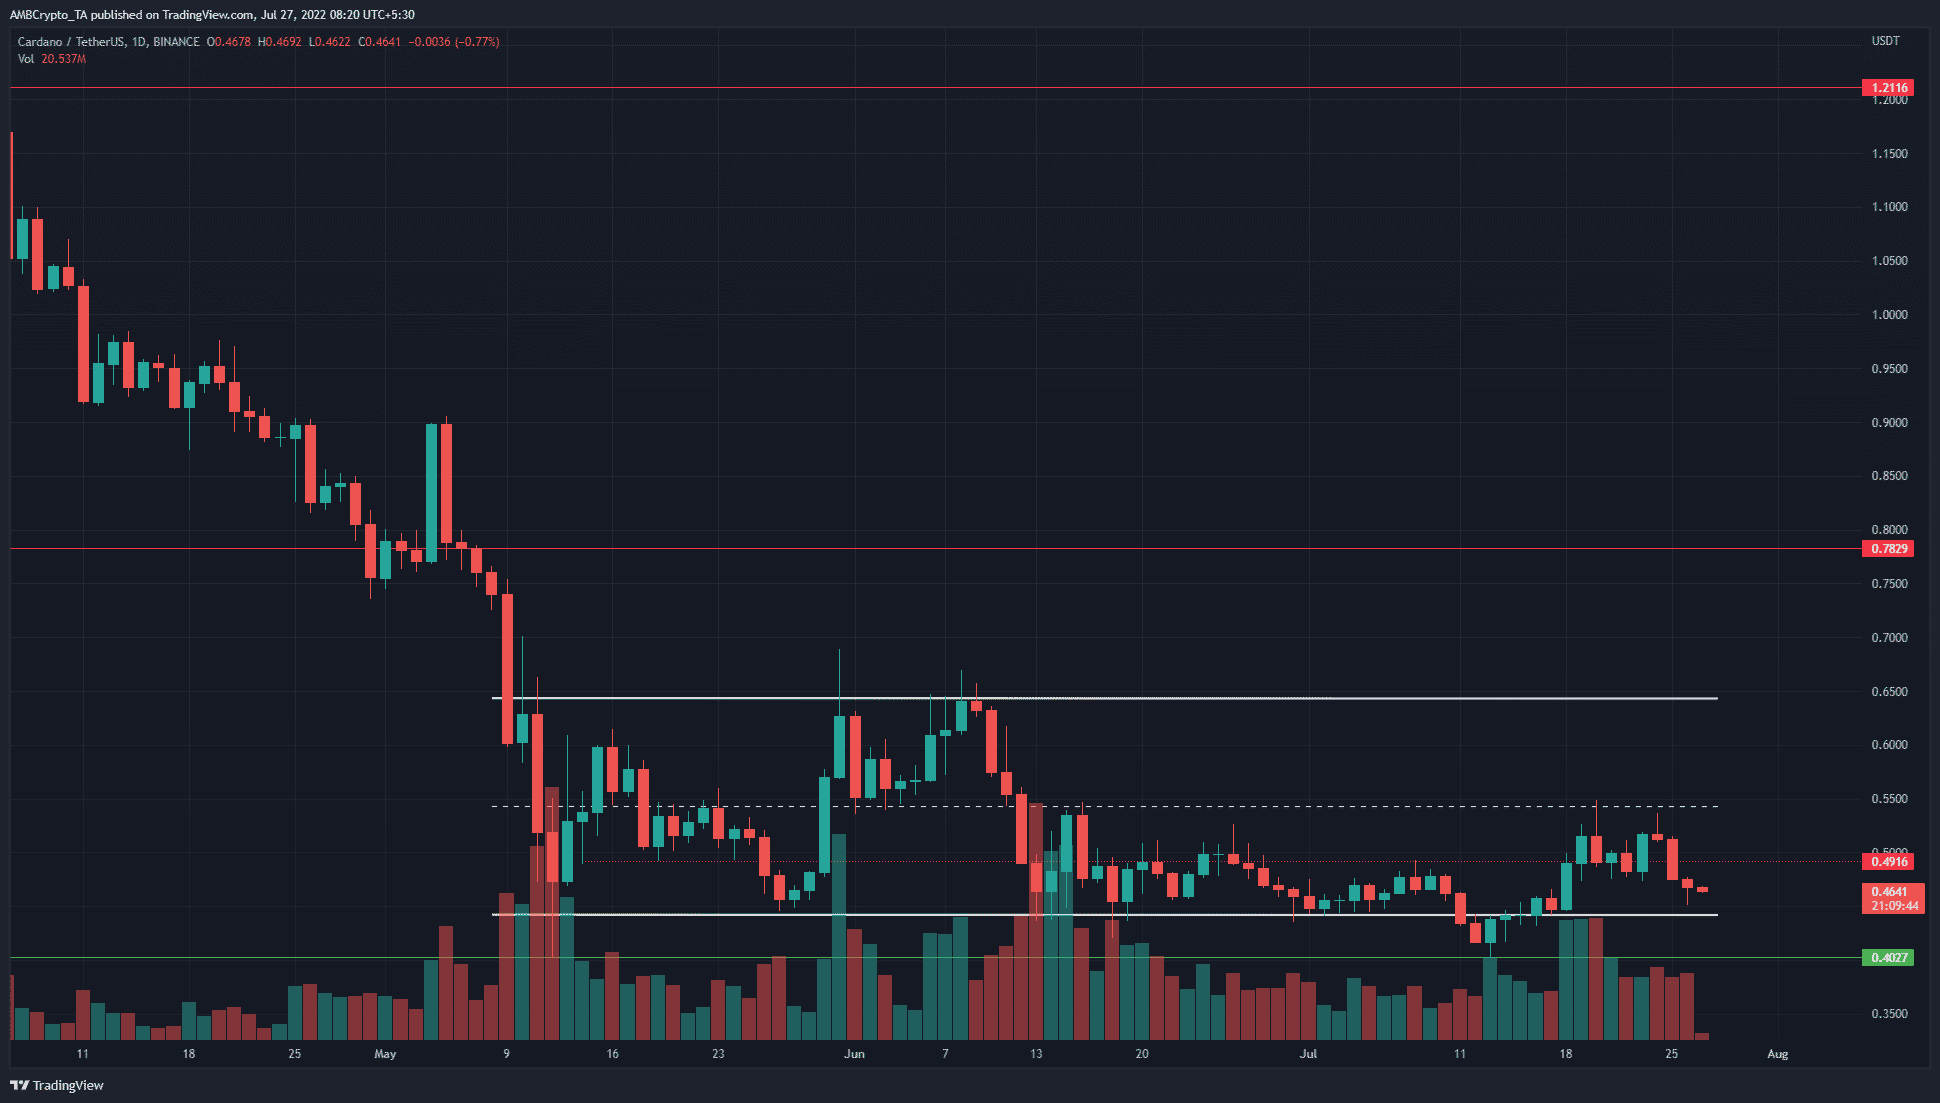 Cardano falls toward range lows once more but demand has persisted since May